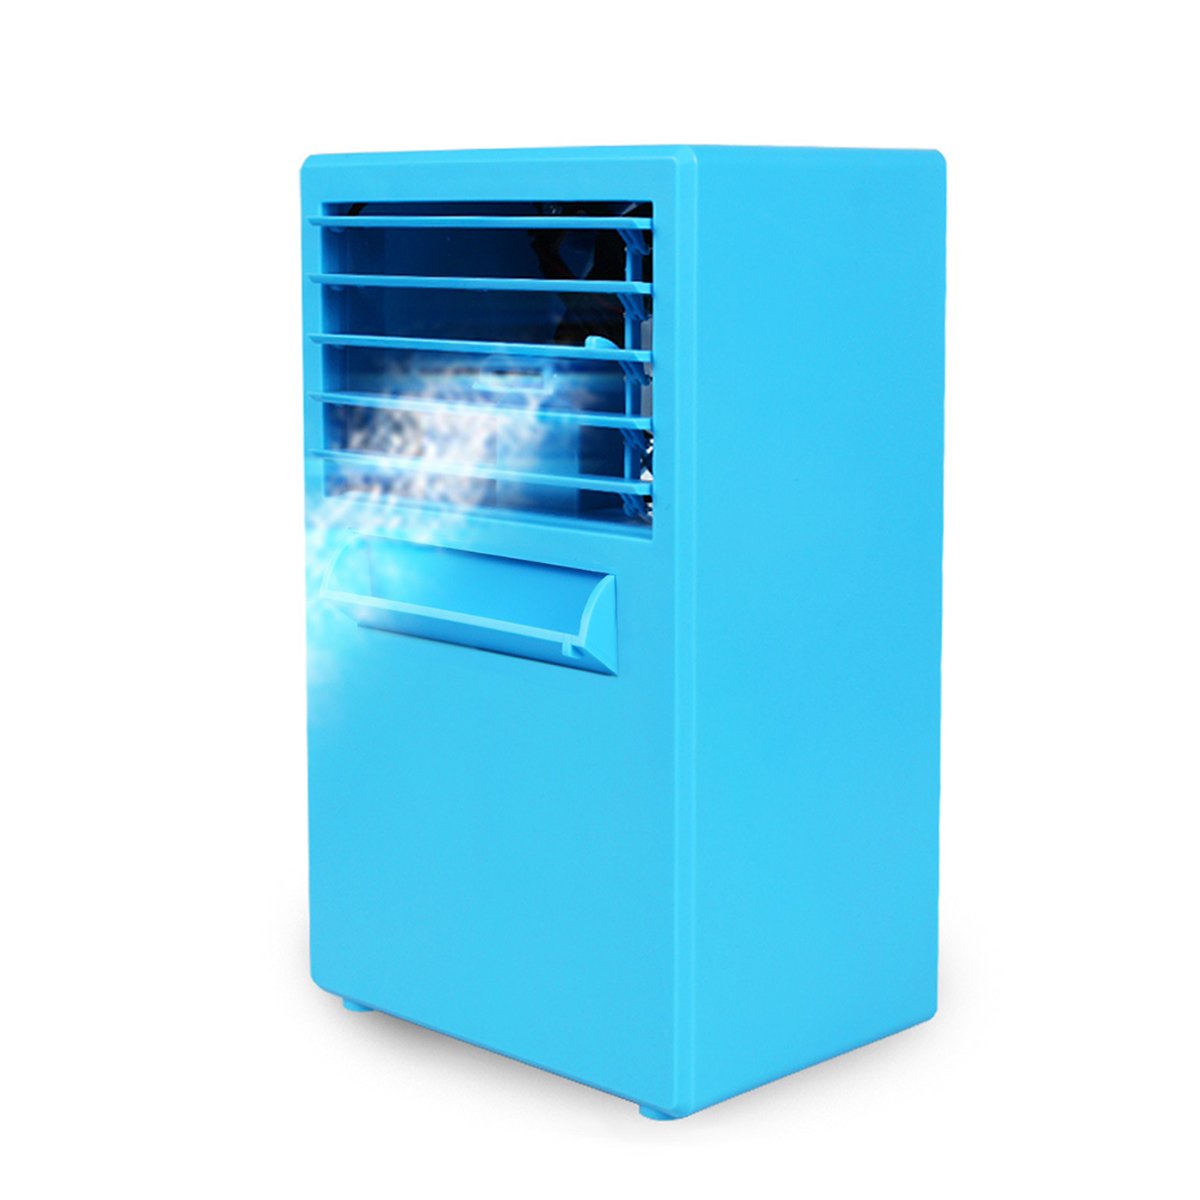 24V Portable Mini Conditioner Fan USB Air Cooler Camping Travel Summer Cooling Machine 2